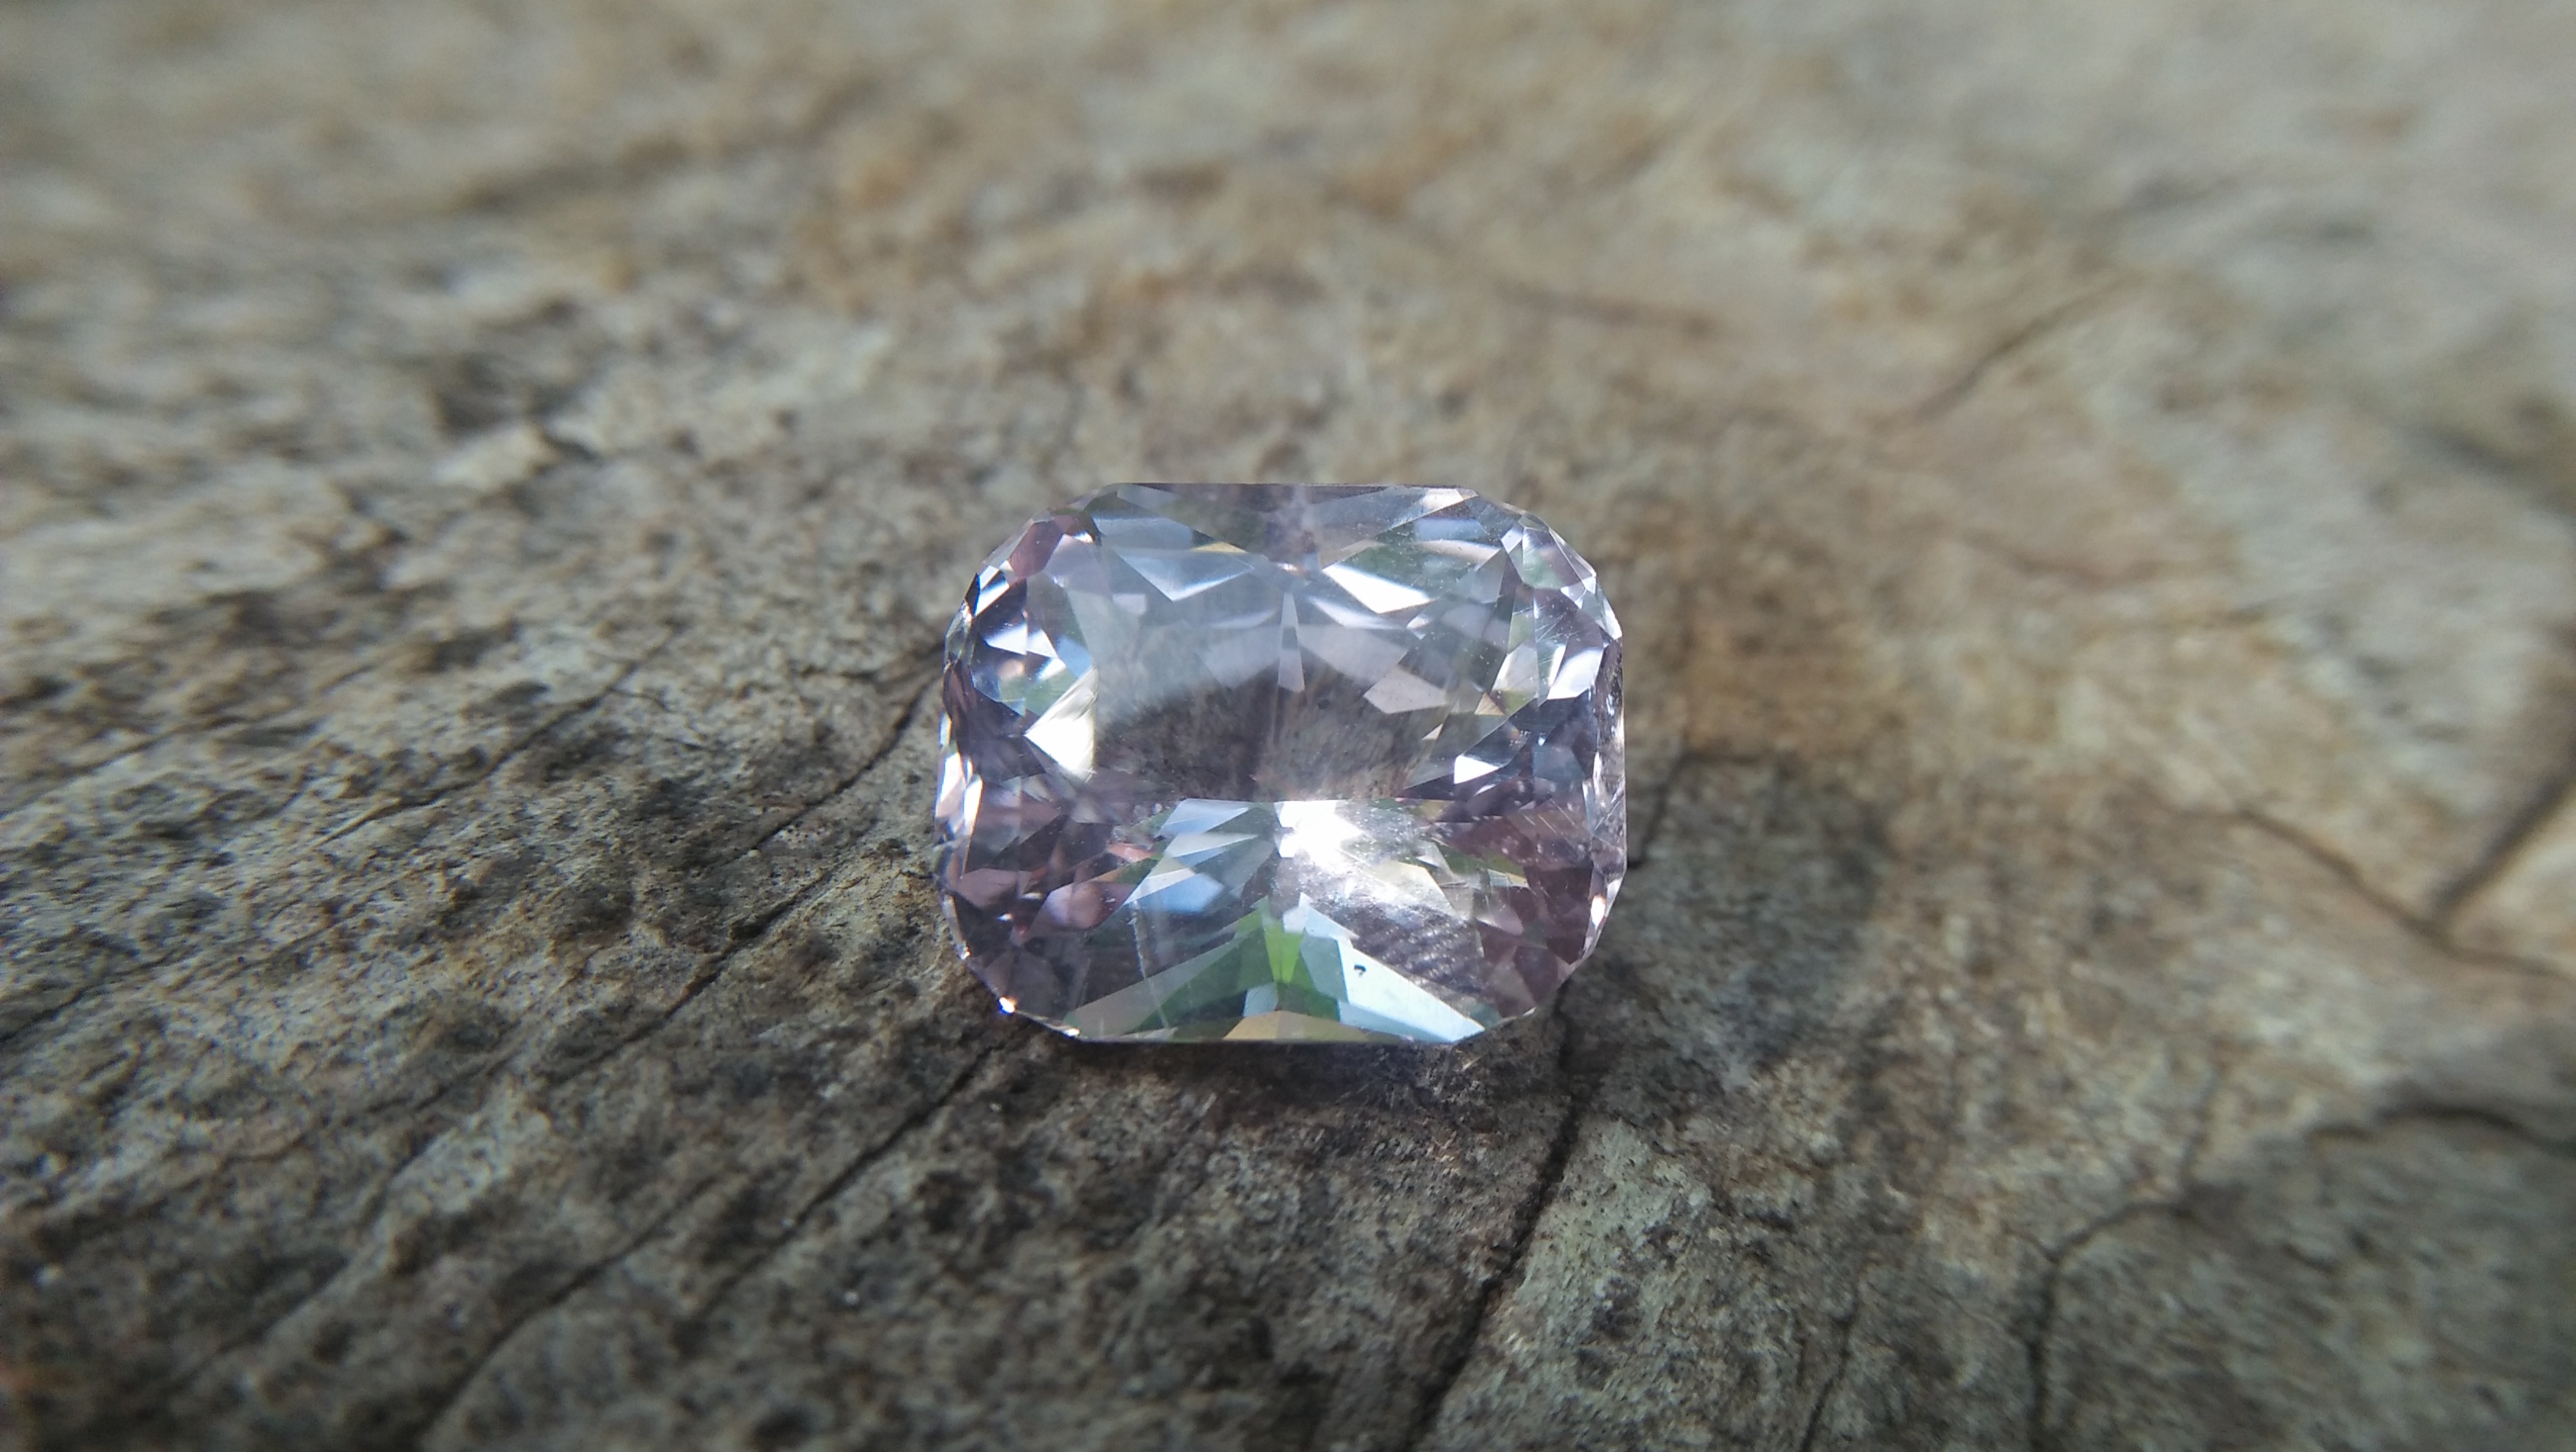 MORGANITE is a color variety of the mineral beryl. Beryl is a mineral composed of beryllium aluminium cyclosilicate with the chemical formula Be₃Al₂. Well-known varieties of beryl include emerald and aquamarine. Naturally occurring, hexagonal crystals of beryl can be up to several meters in size, but terminated crystals are relatively rare. Hardness : 7.5 – 8 Crystal system : Hexagonal Specific gravity : Average 2.76 Optical properties : Uniaxial (-) Refractive index : nω = 1.564–1.595 nε = 1.568–1.602 Morganite is a gemstone of divine love also It removes the pressure to perform or excel all the time. Morganite is a heart chakra stone and carries the energy of Divine love and compassion. Morganite gemstone is a natural birthstone of October and November